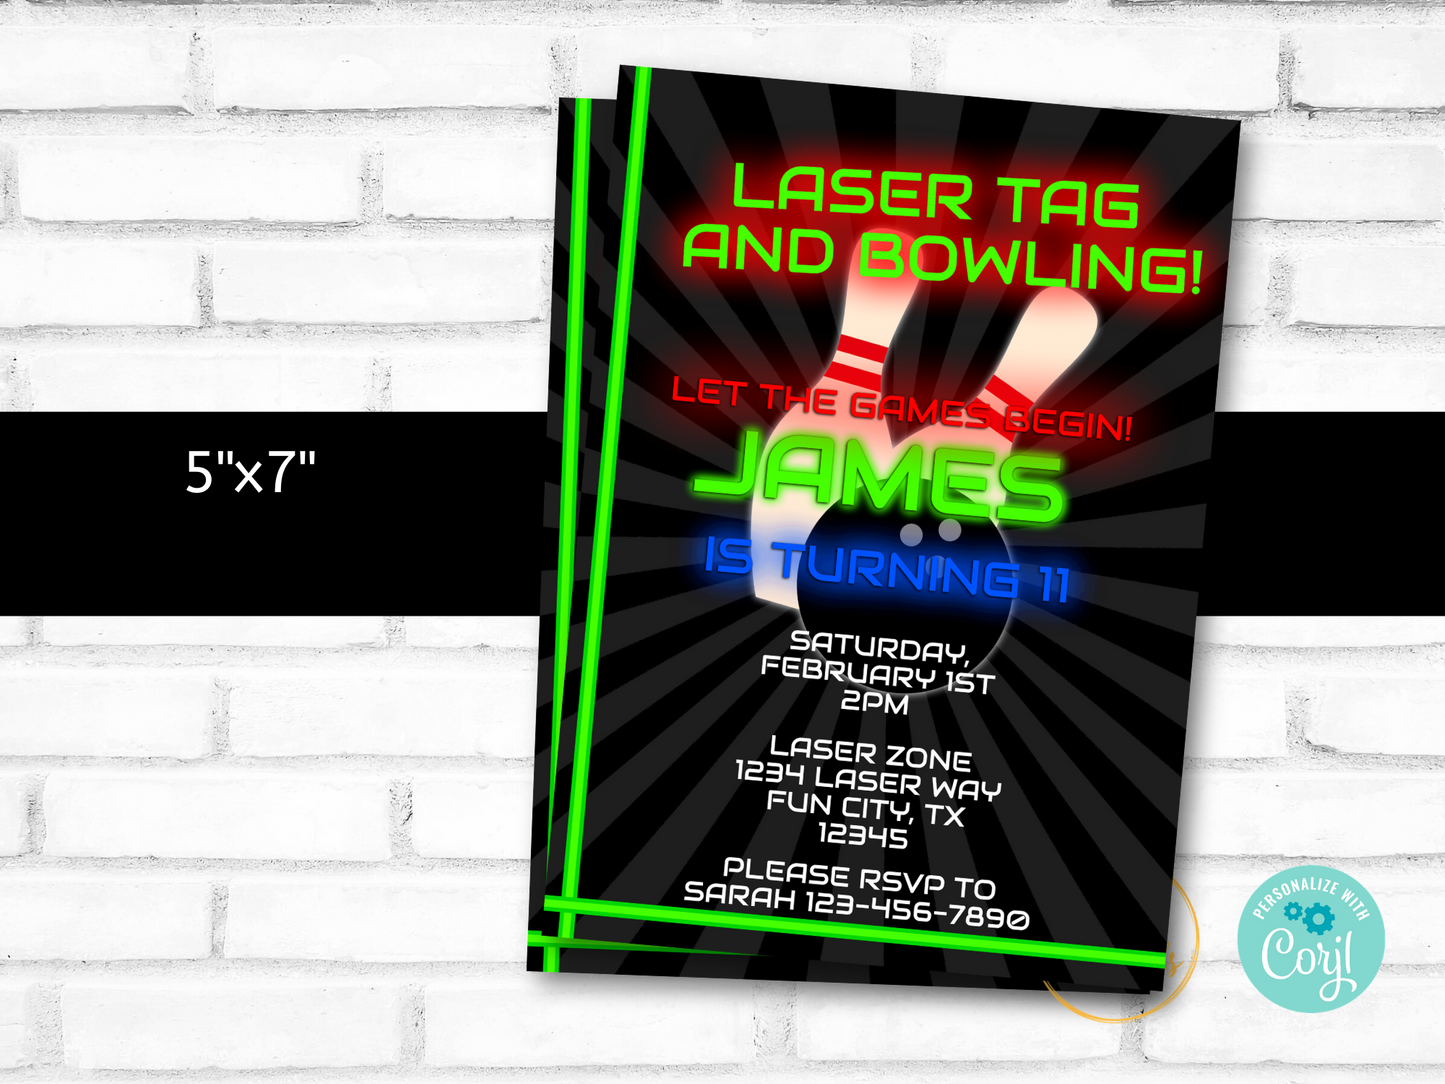 Laser Tag Invitations for Boys or Girls - Printable or Printed